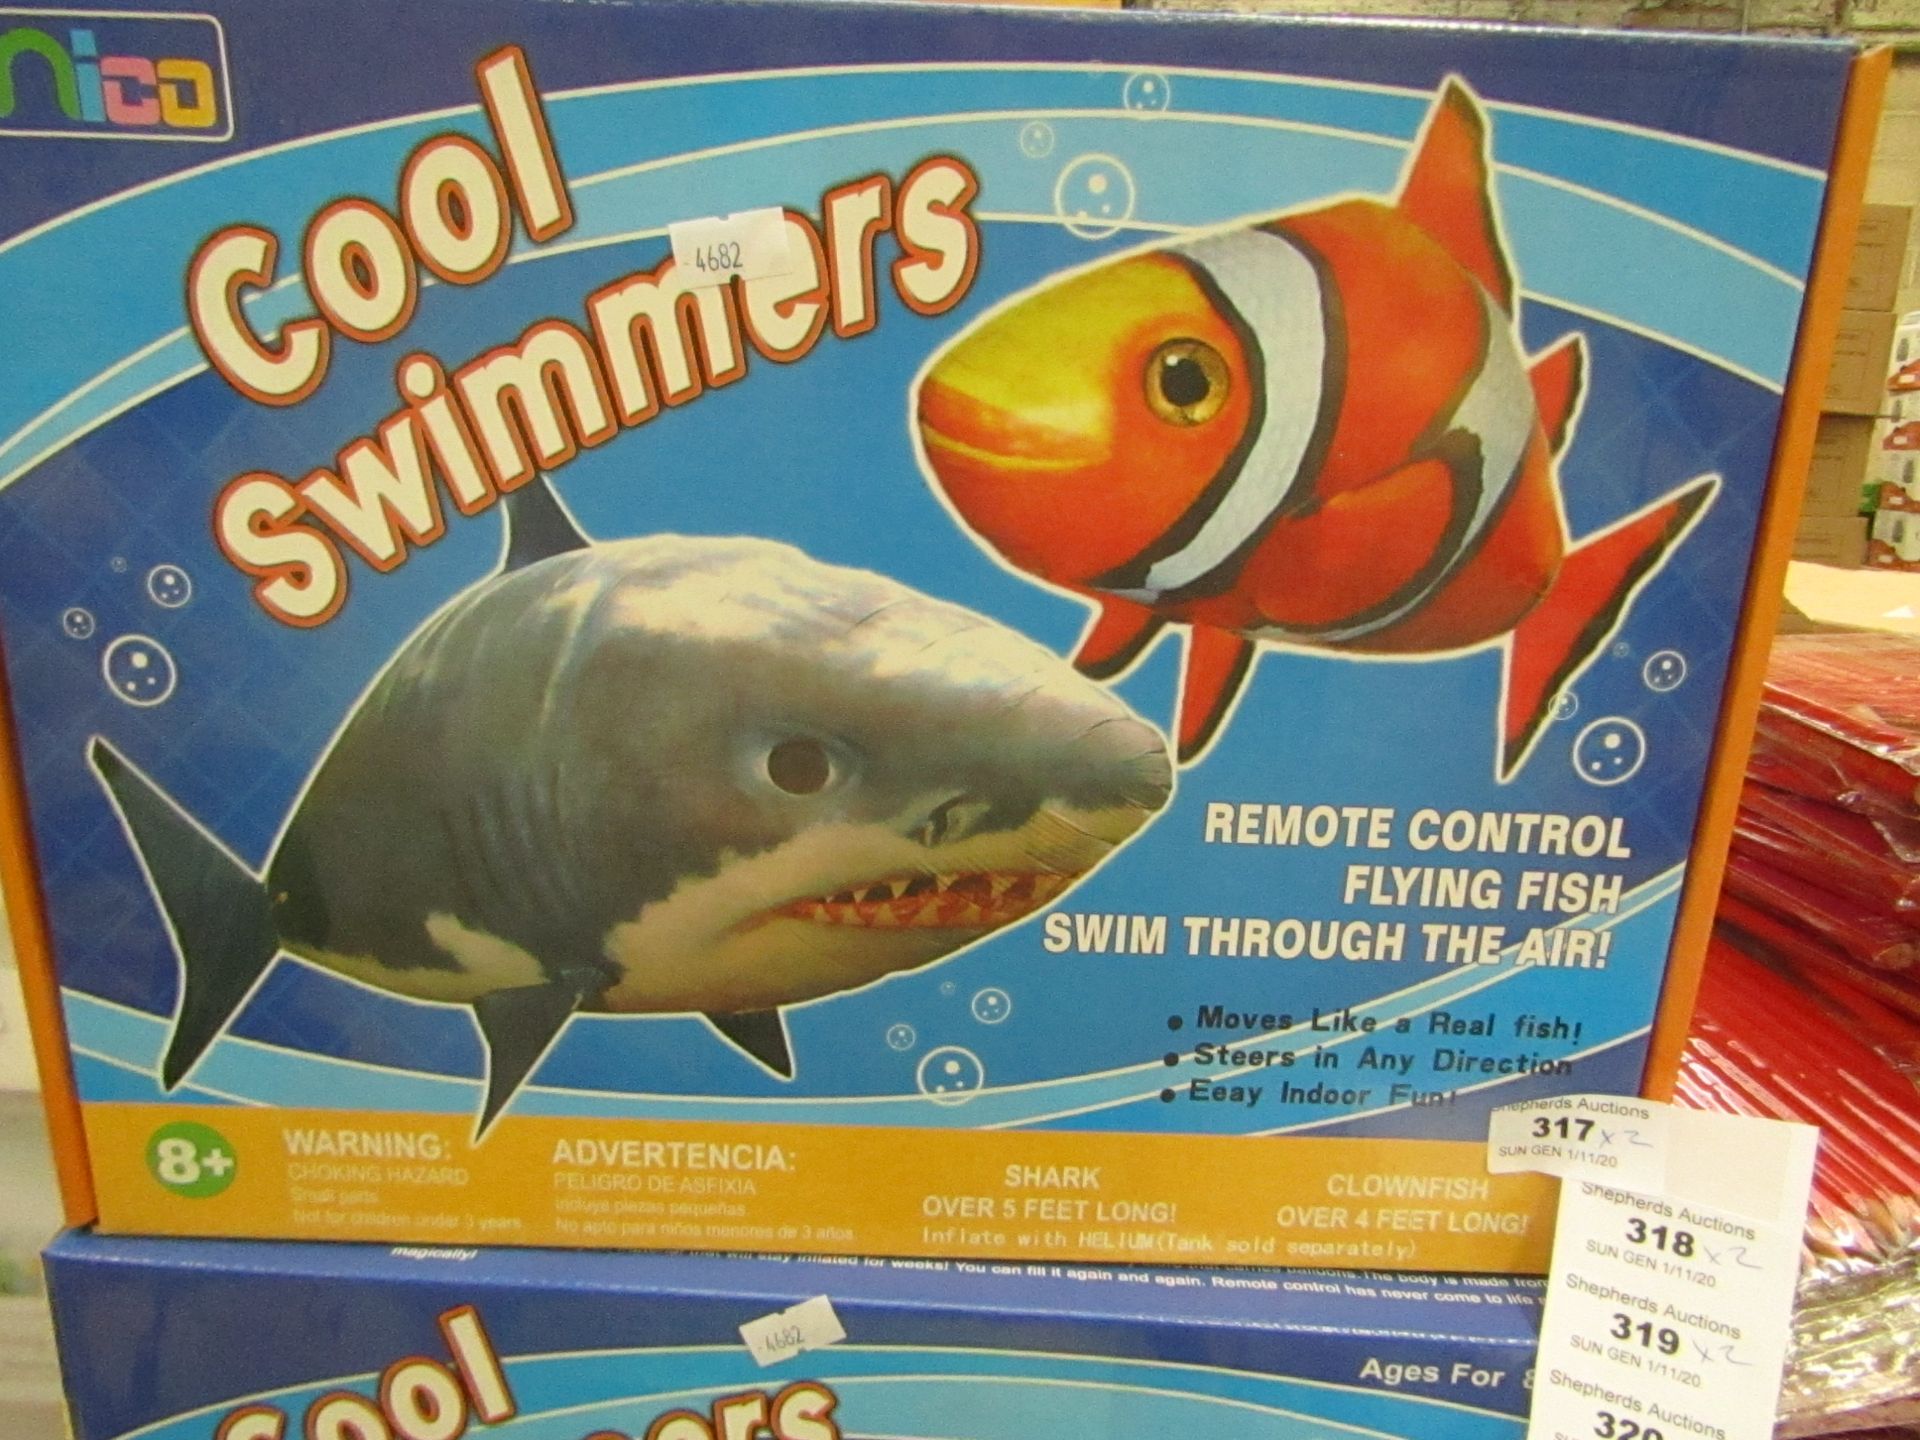 2 x Nico Cool Swimmers Remote Controlled Flying Fish. New & Boxed